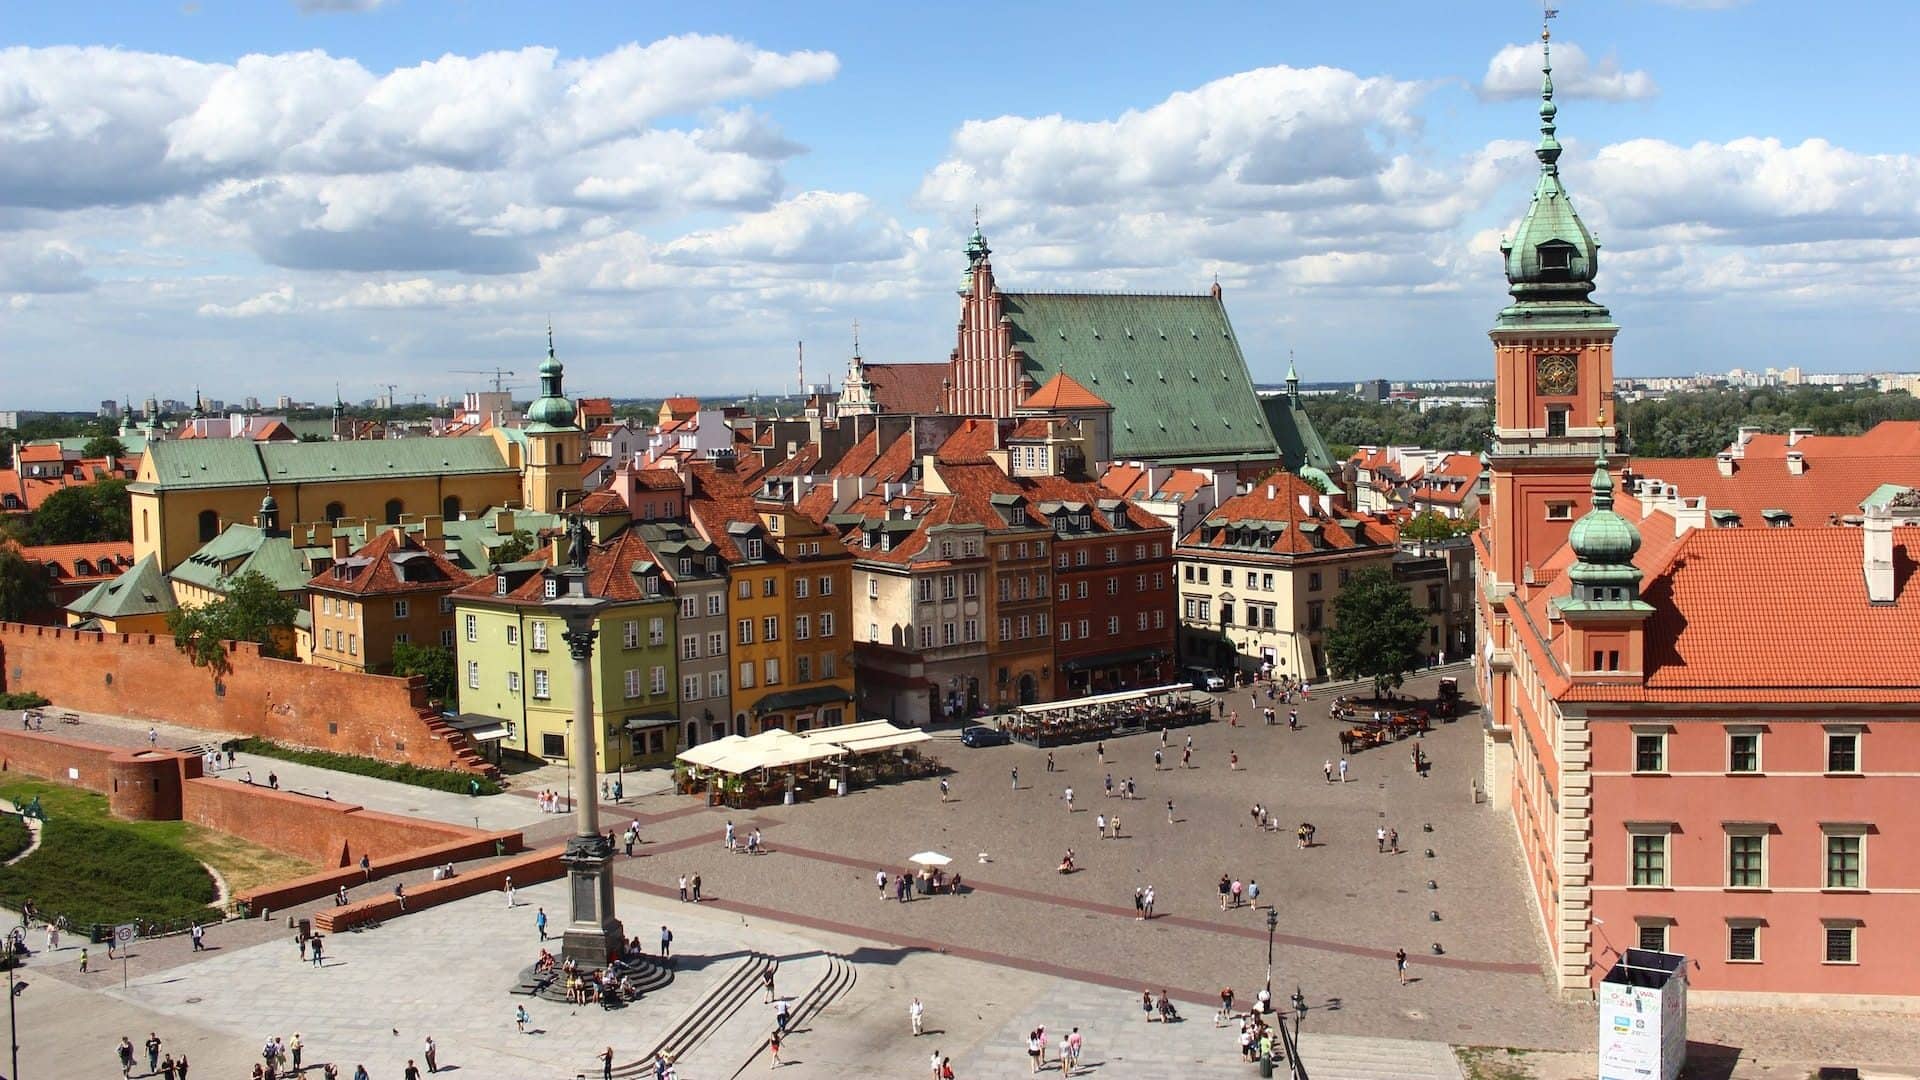 Stare Miasto is the oldest part of Warsaw and has been reconstructed after World War II